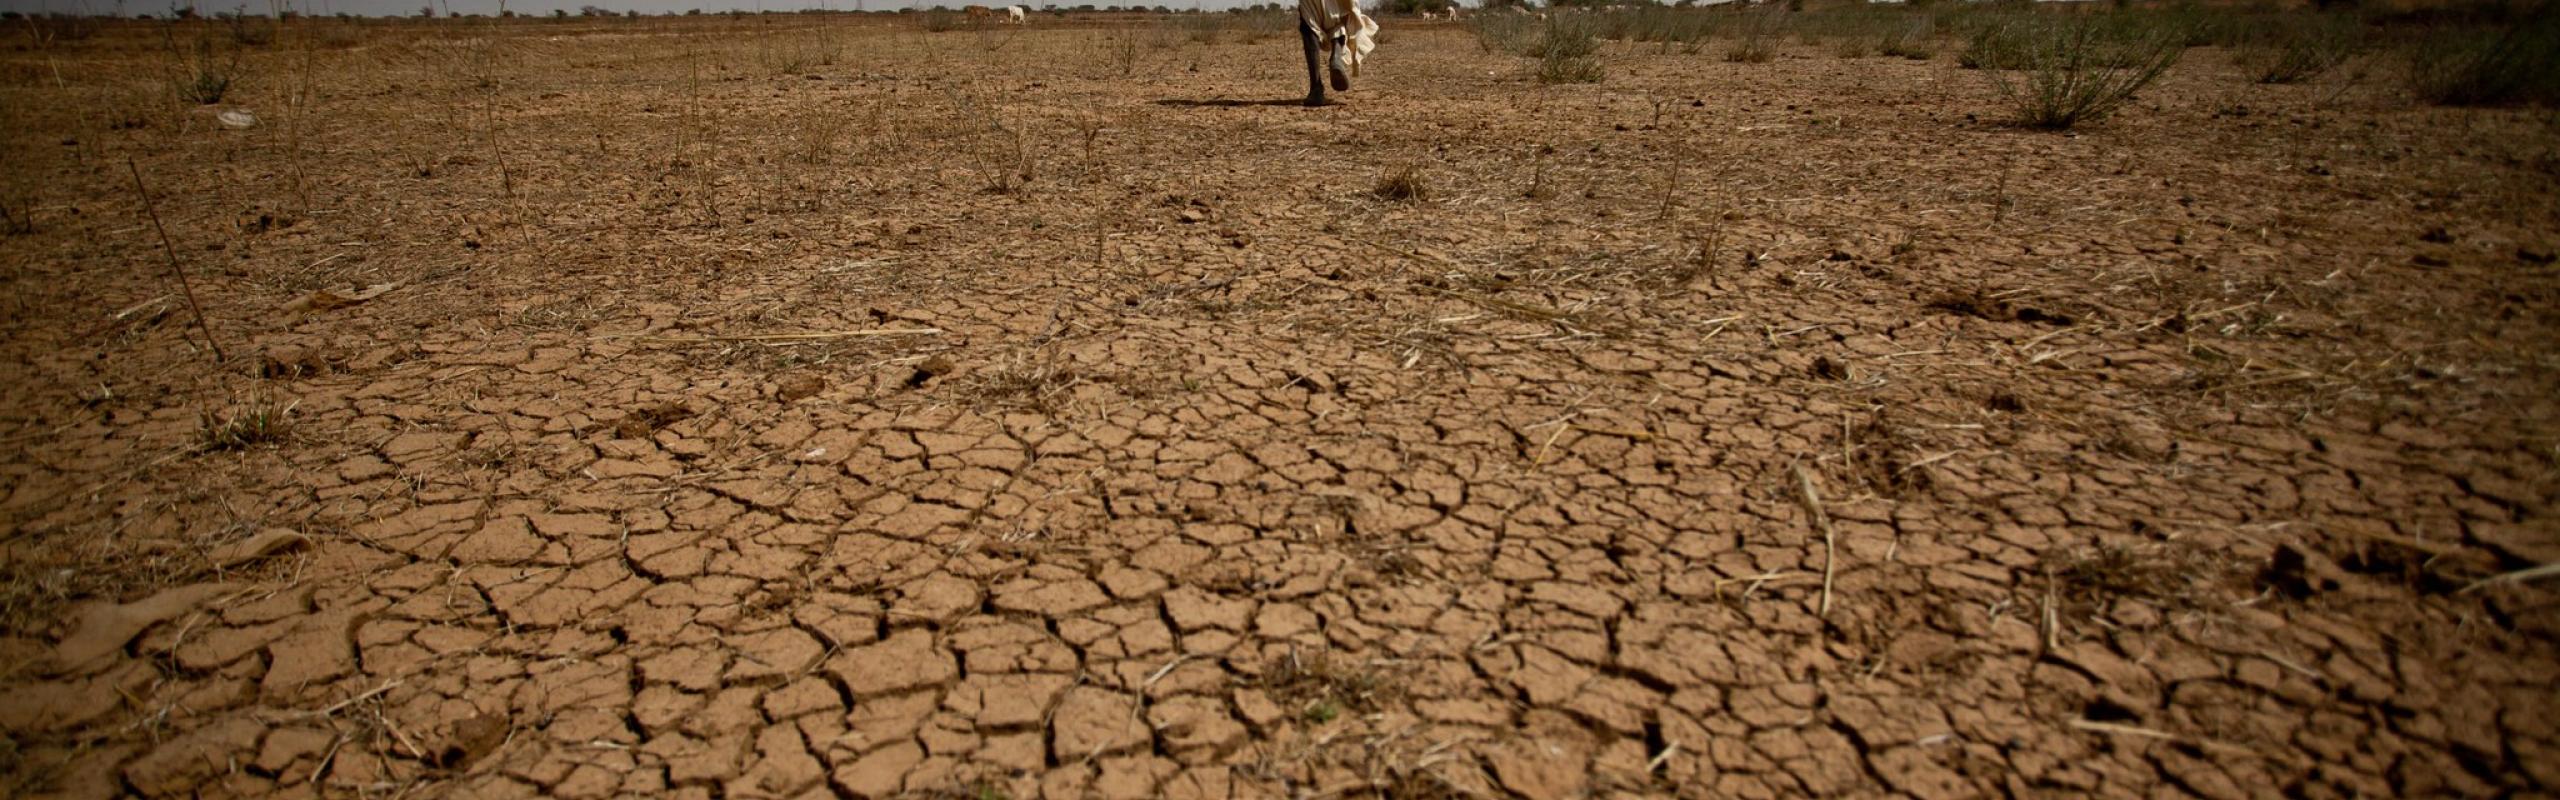 African farmer walking across parched land